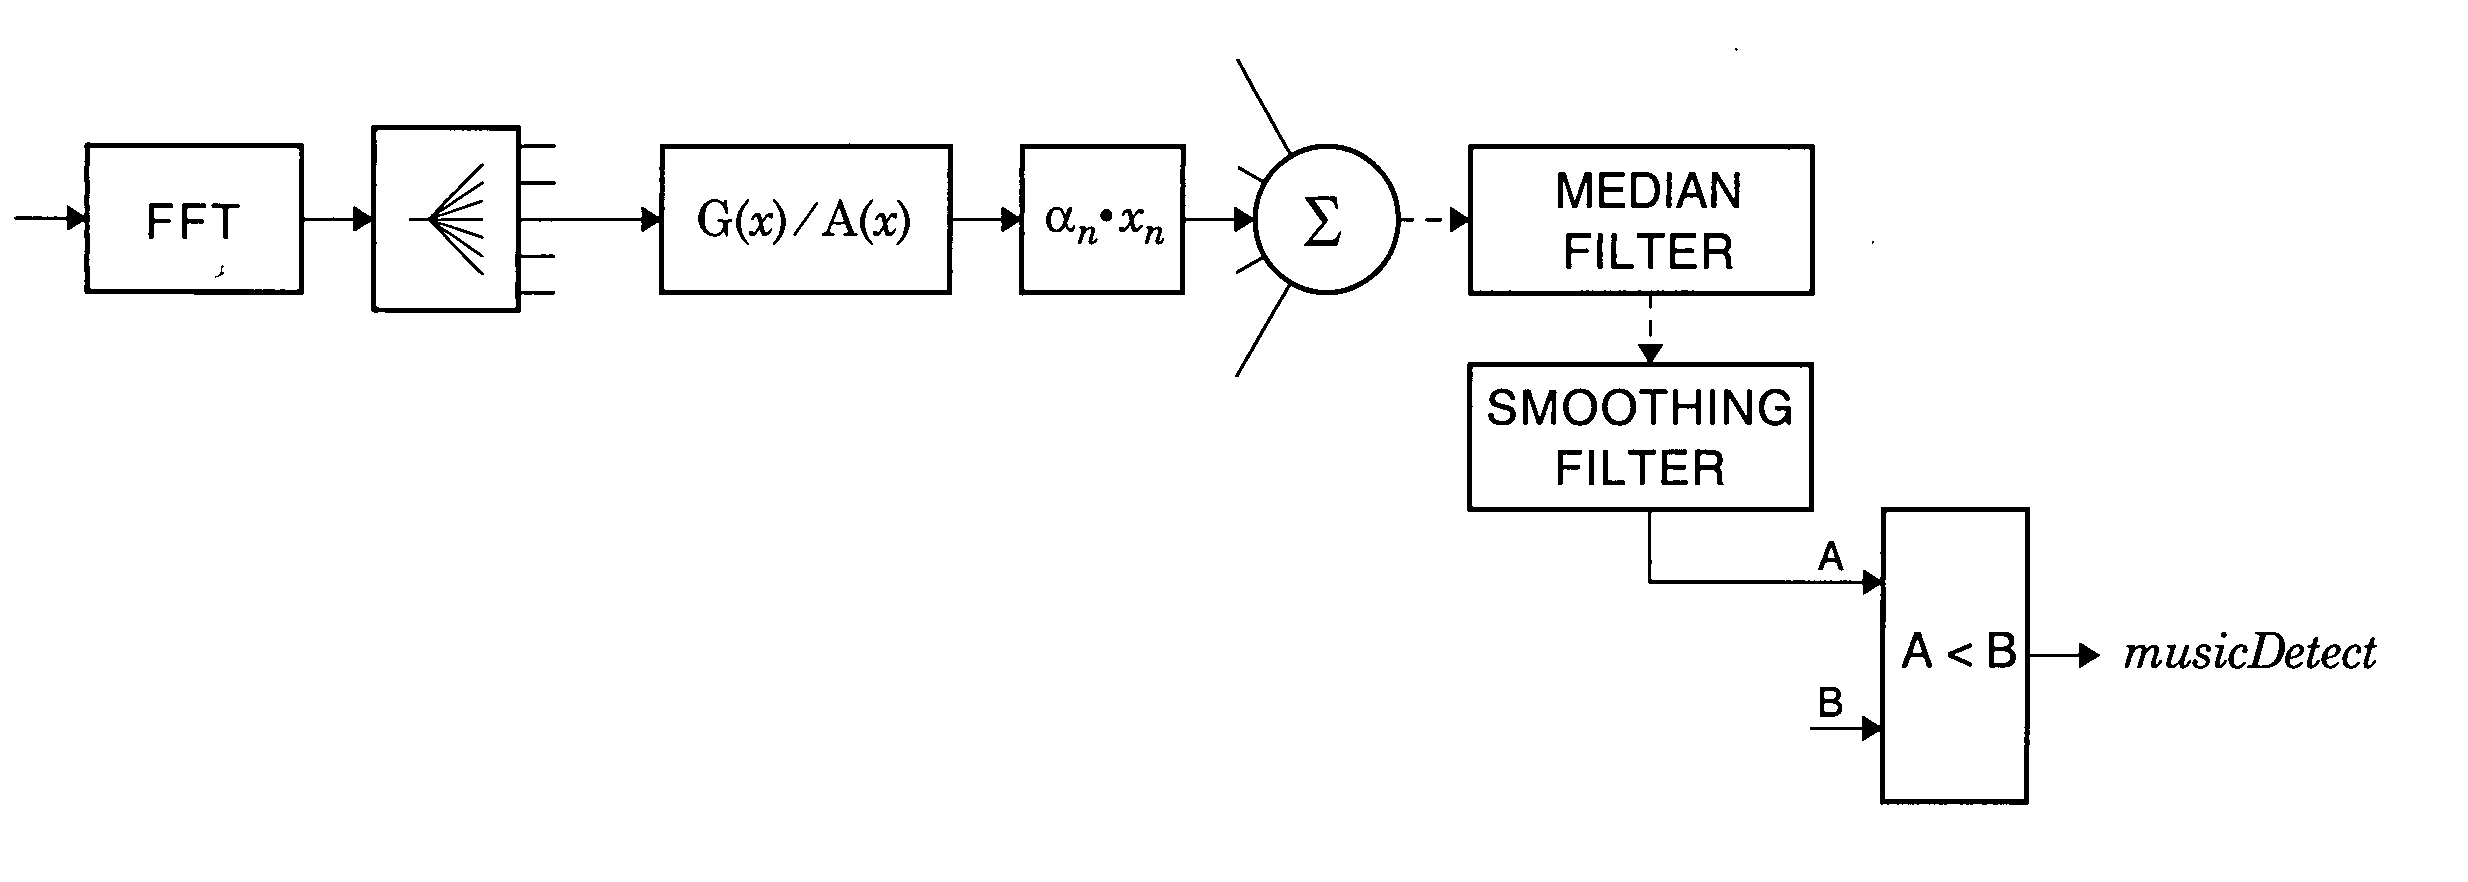 Music detector for echo cancellation and noise reduction